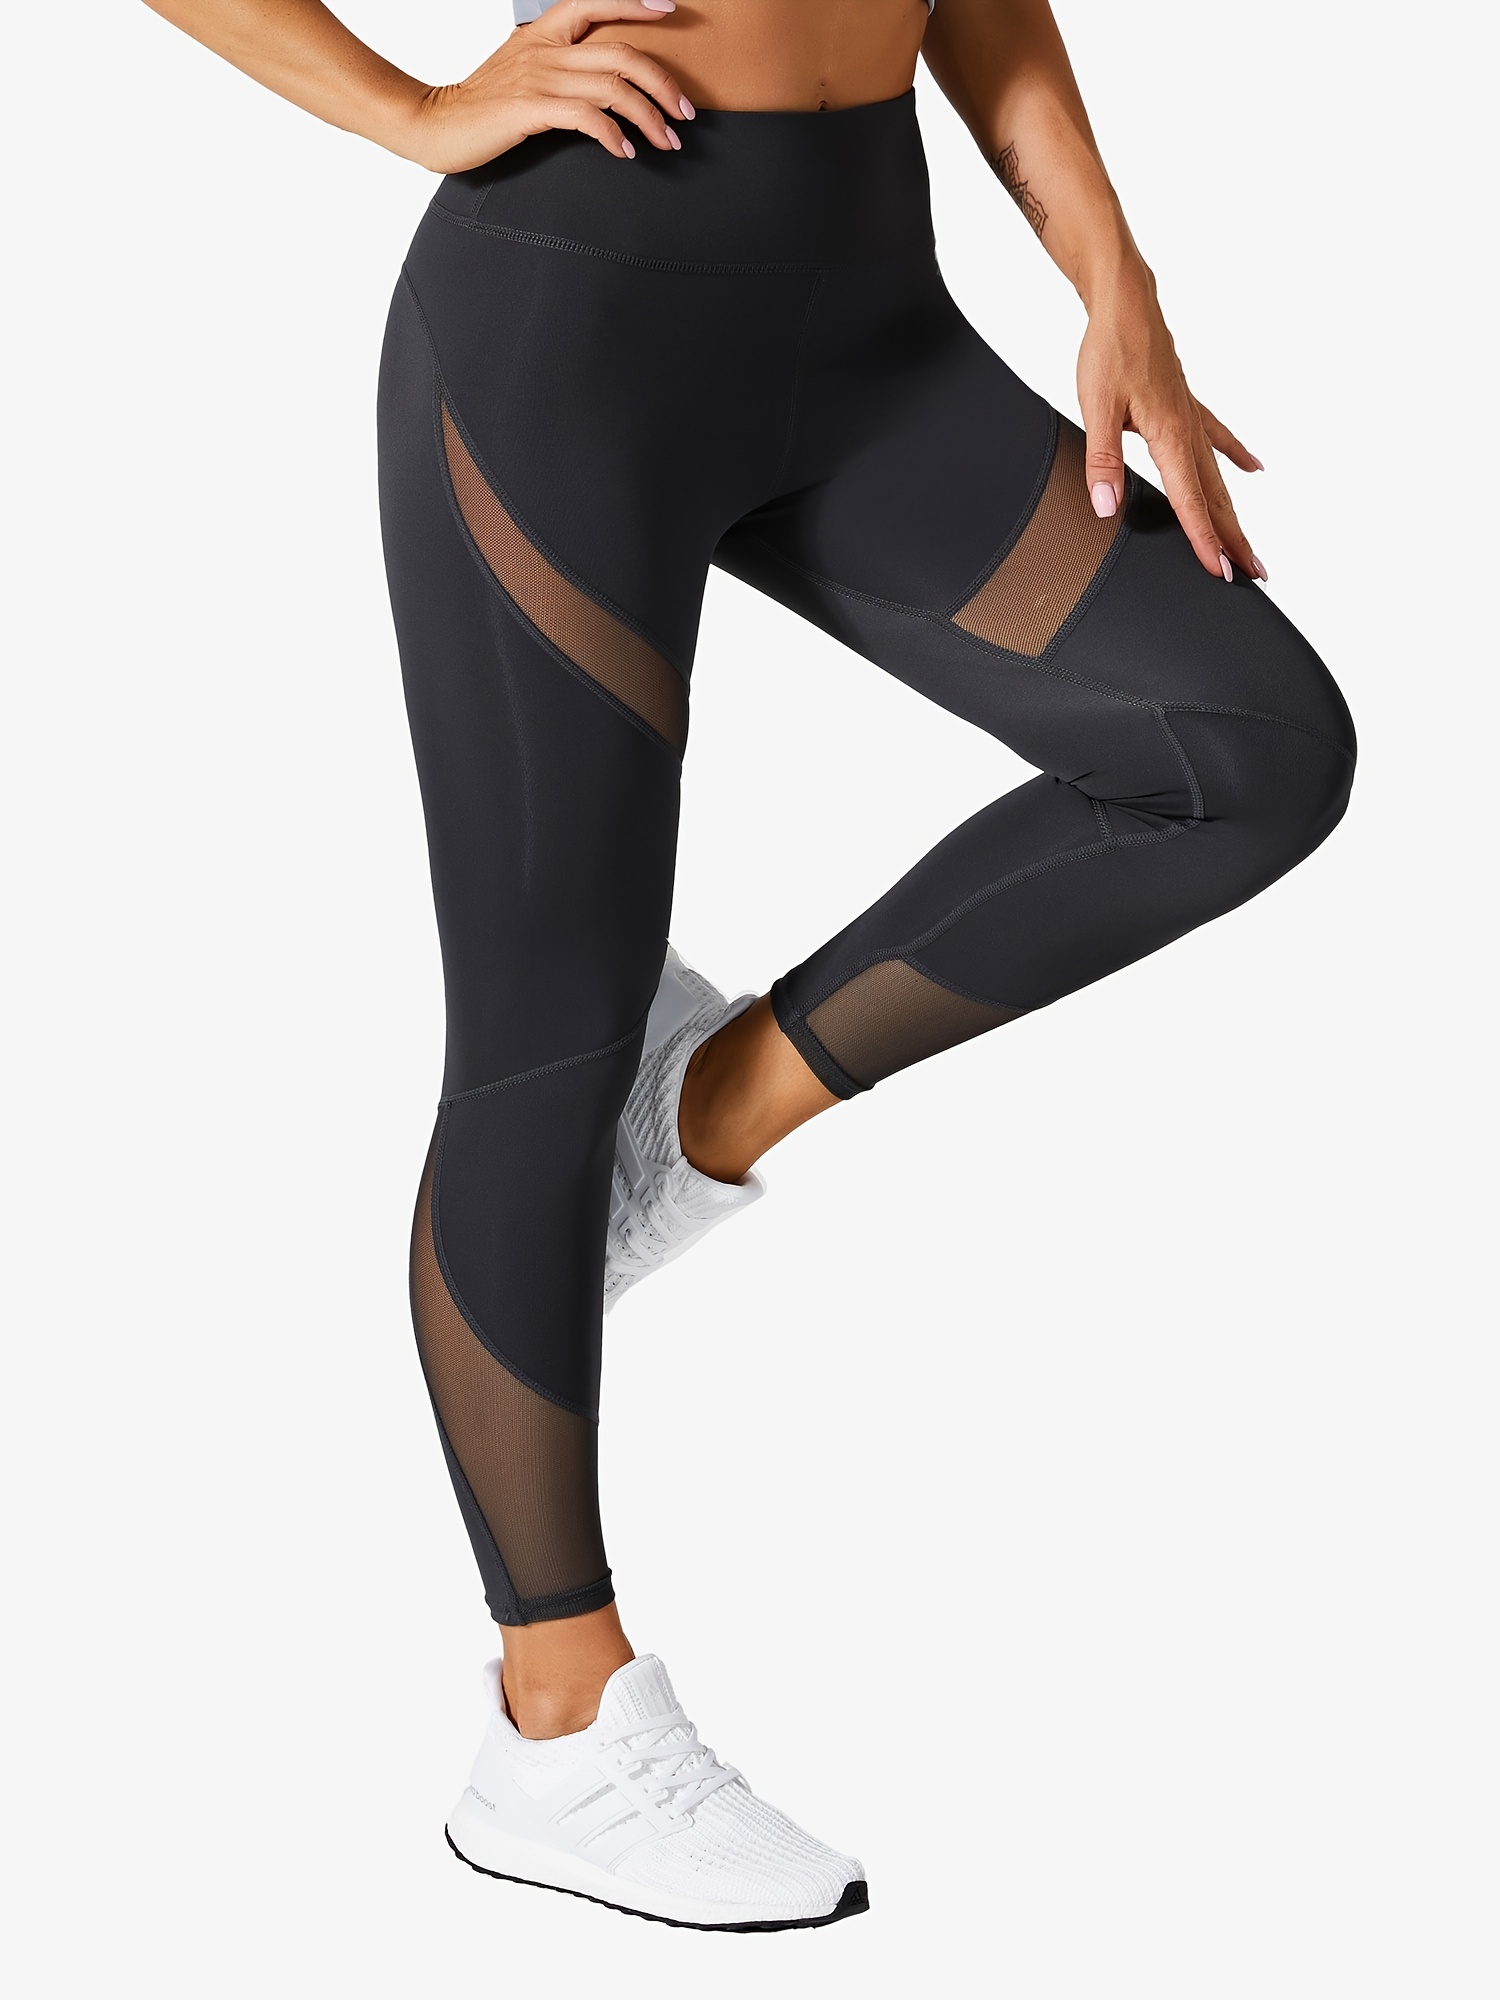 Fit Booty Boost Mesh Insert Workout Leggings